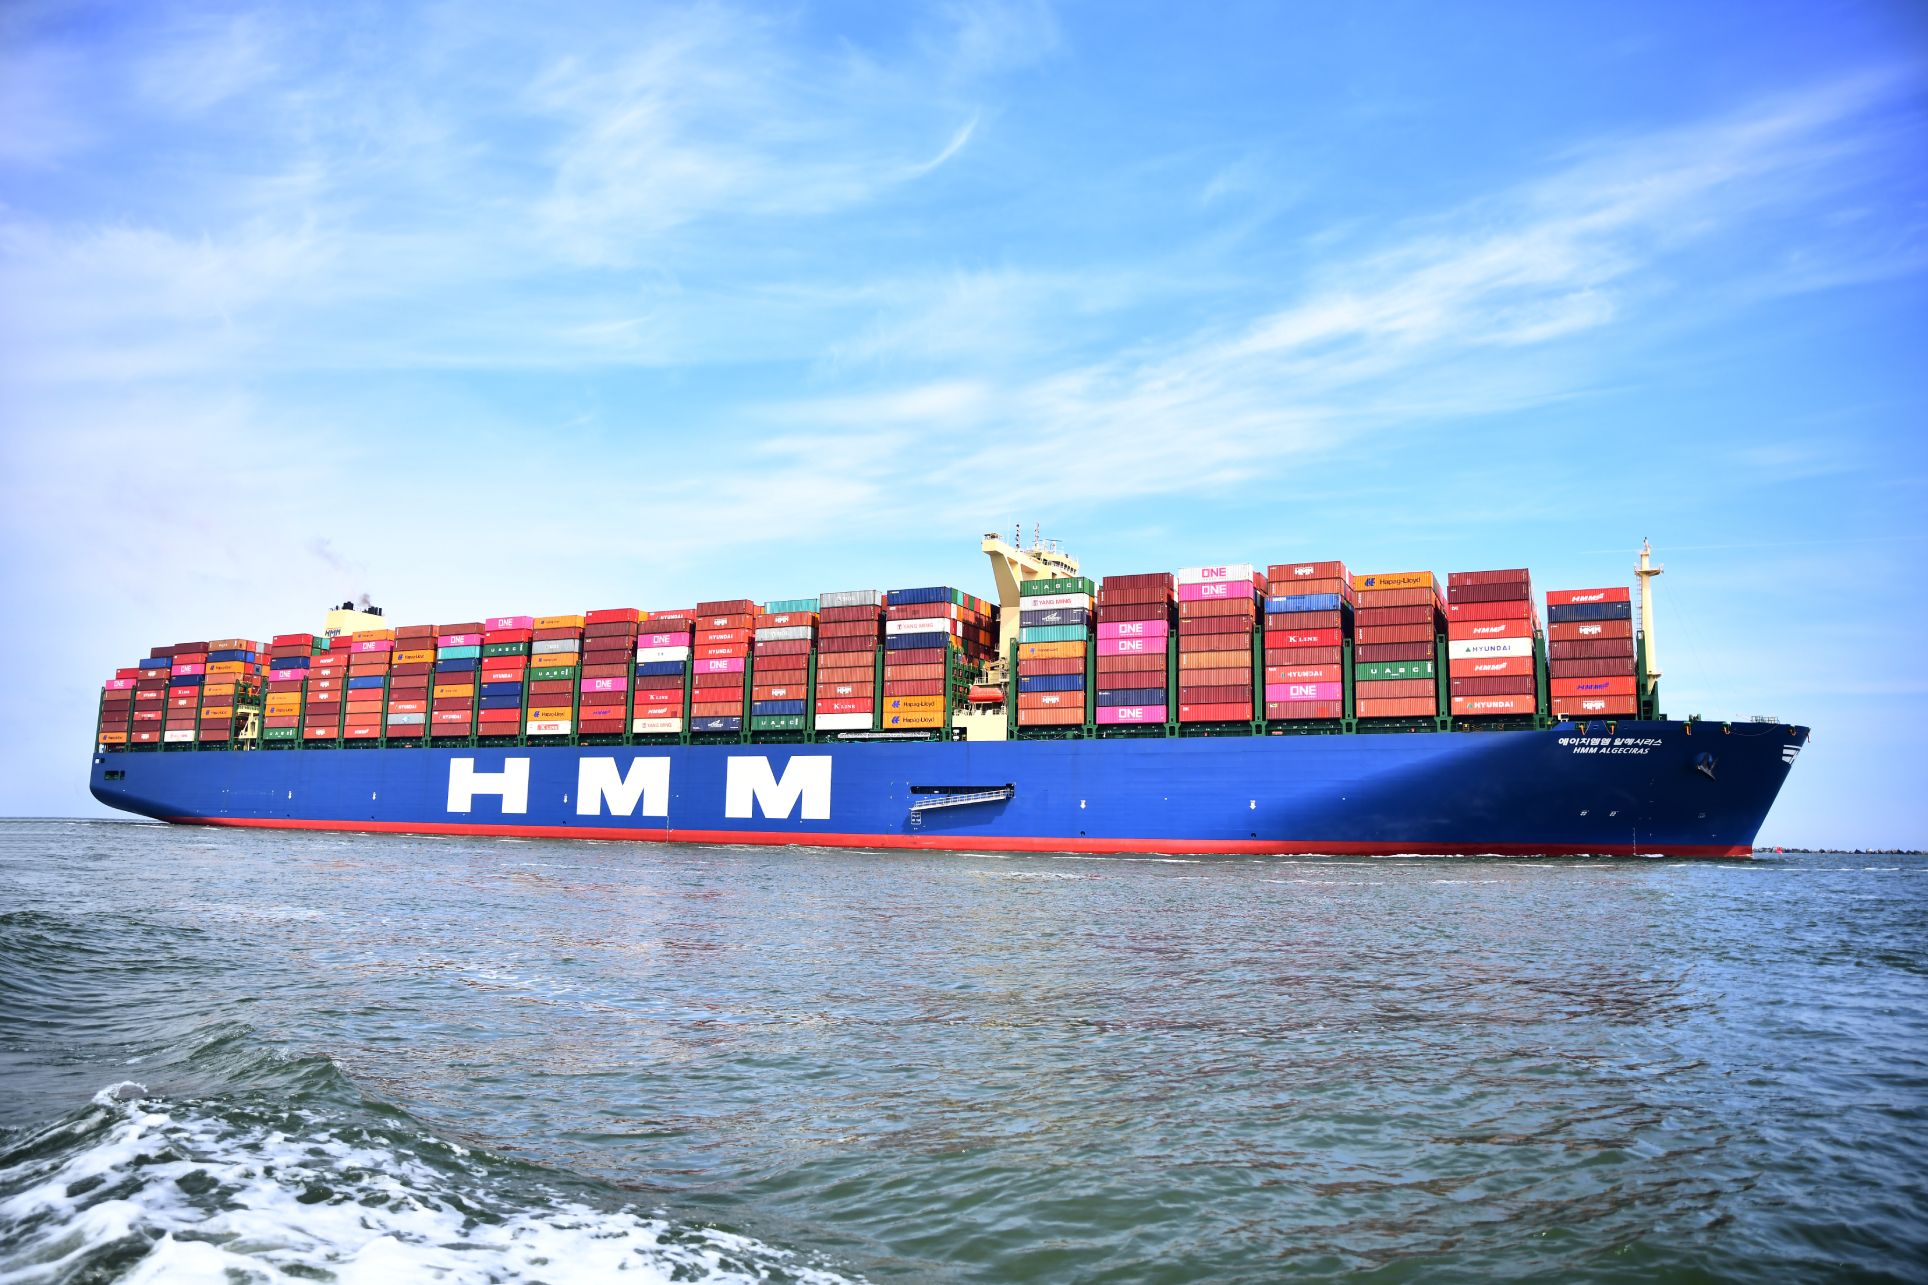 A container ship of HMM, seen from the side. The company was victim of a cyberattack.